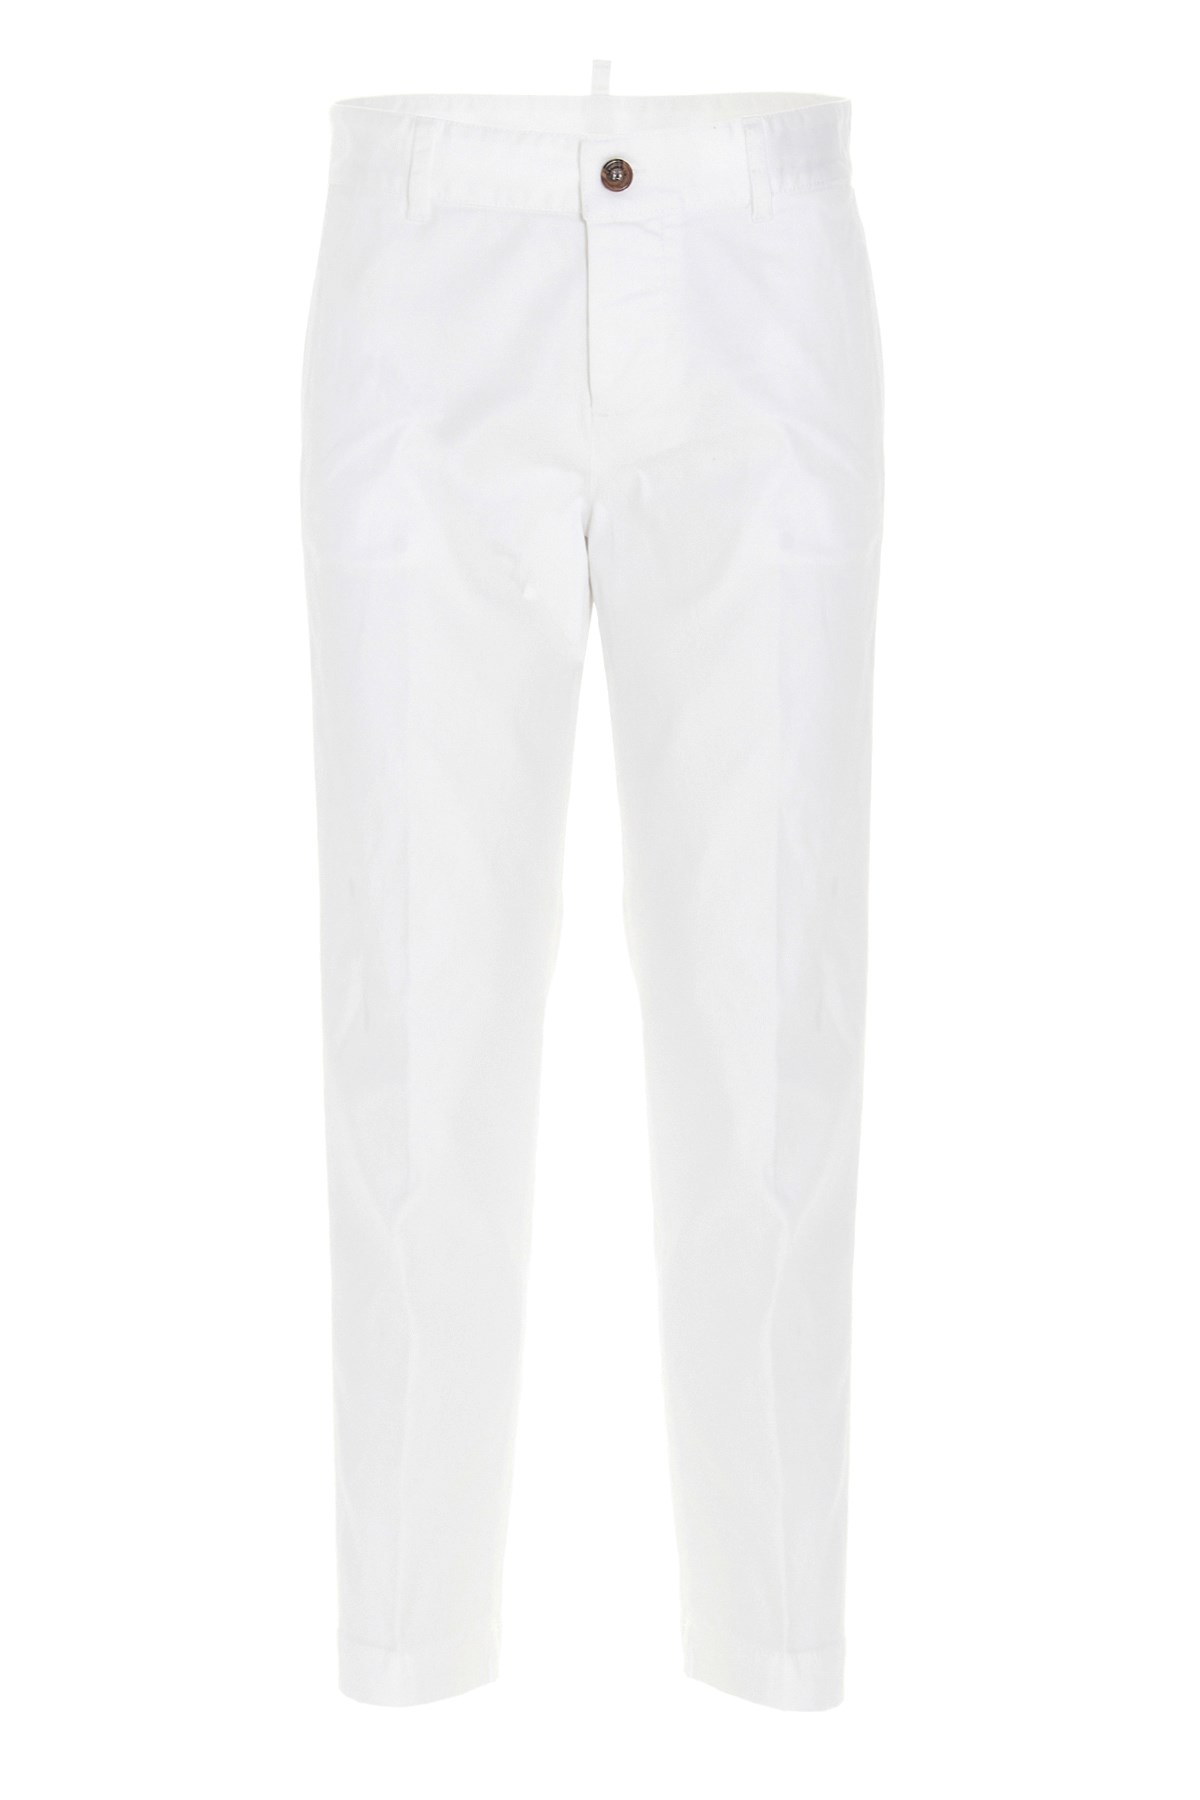 DSQUARED2 Hockney' Trousers